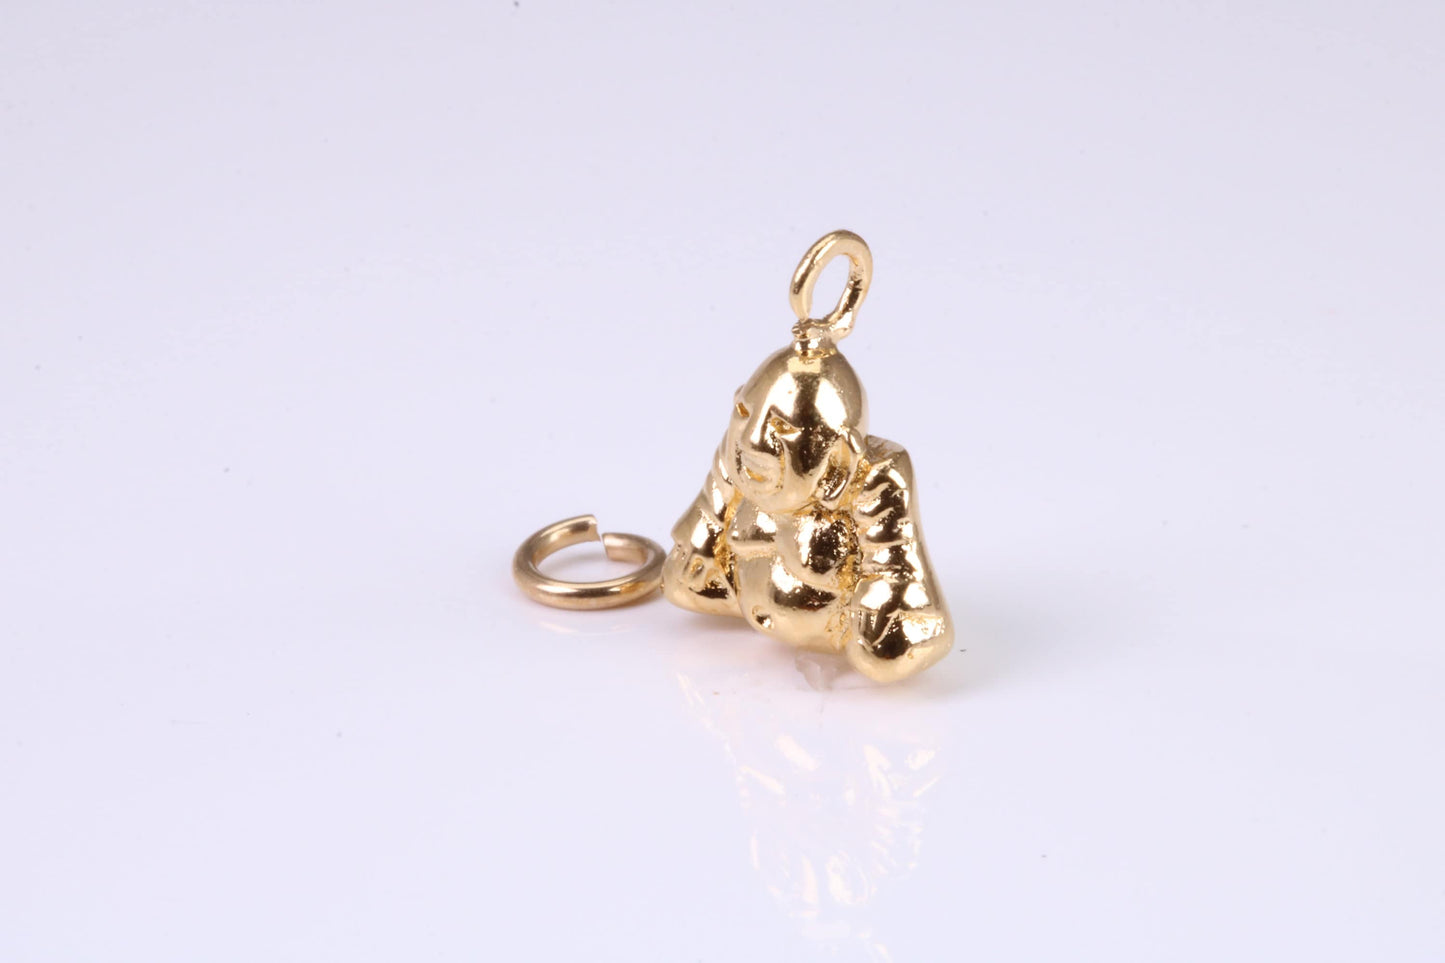 Buddha Charm, Traditional Charm, Made from Solid Yellow Gold, British Hallmarked, Complete with Attachment Link